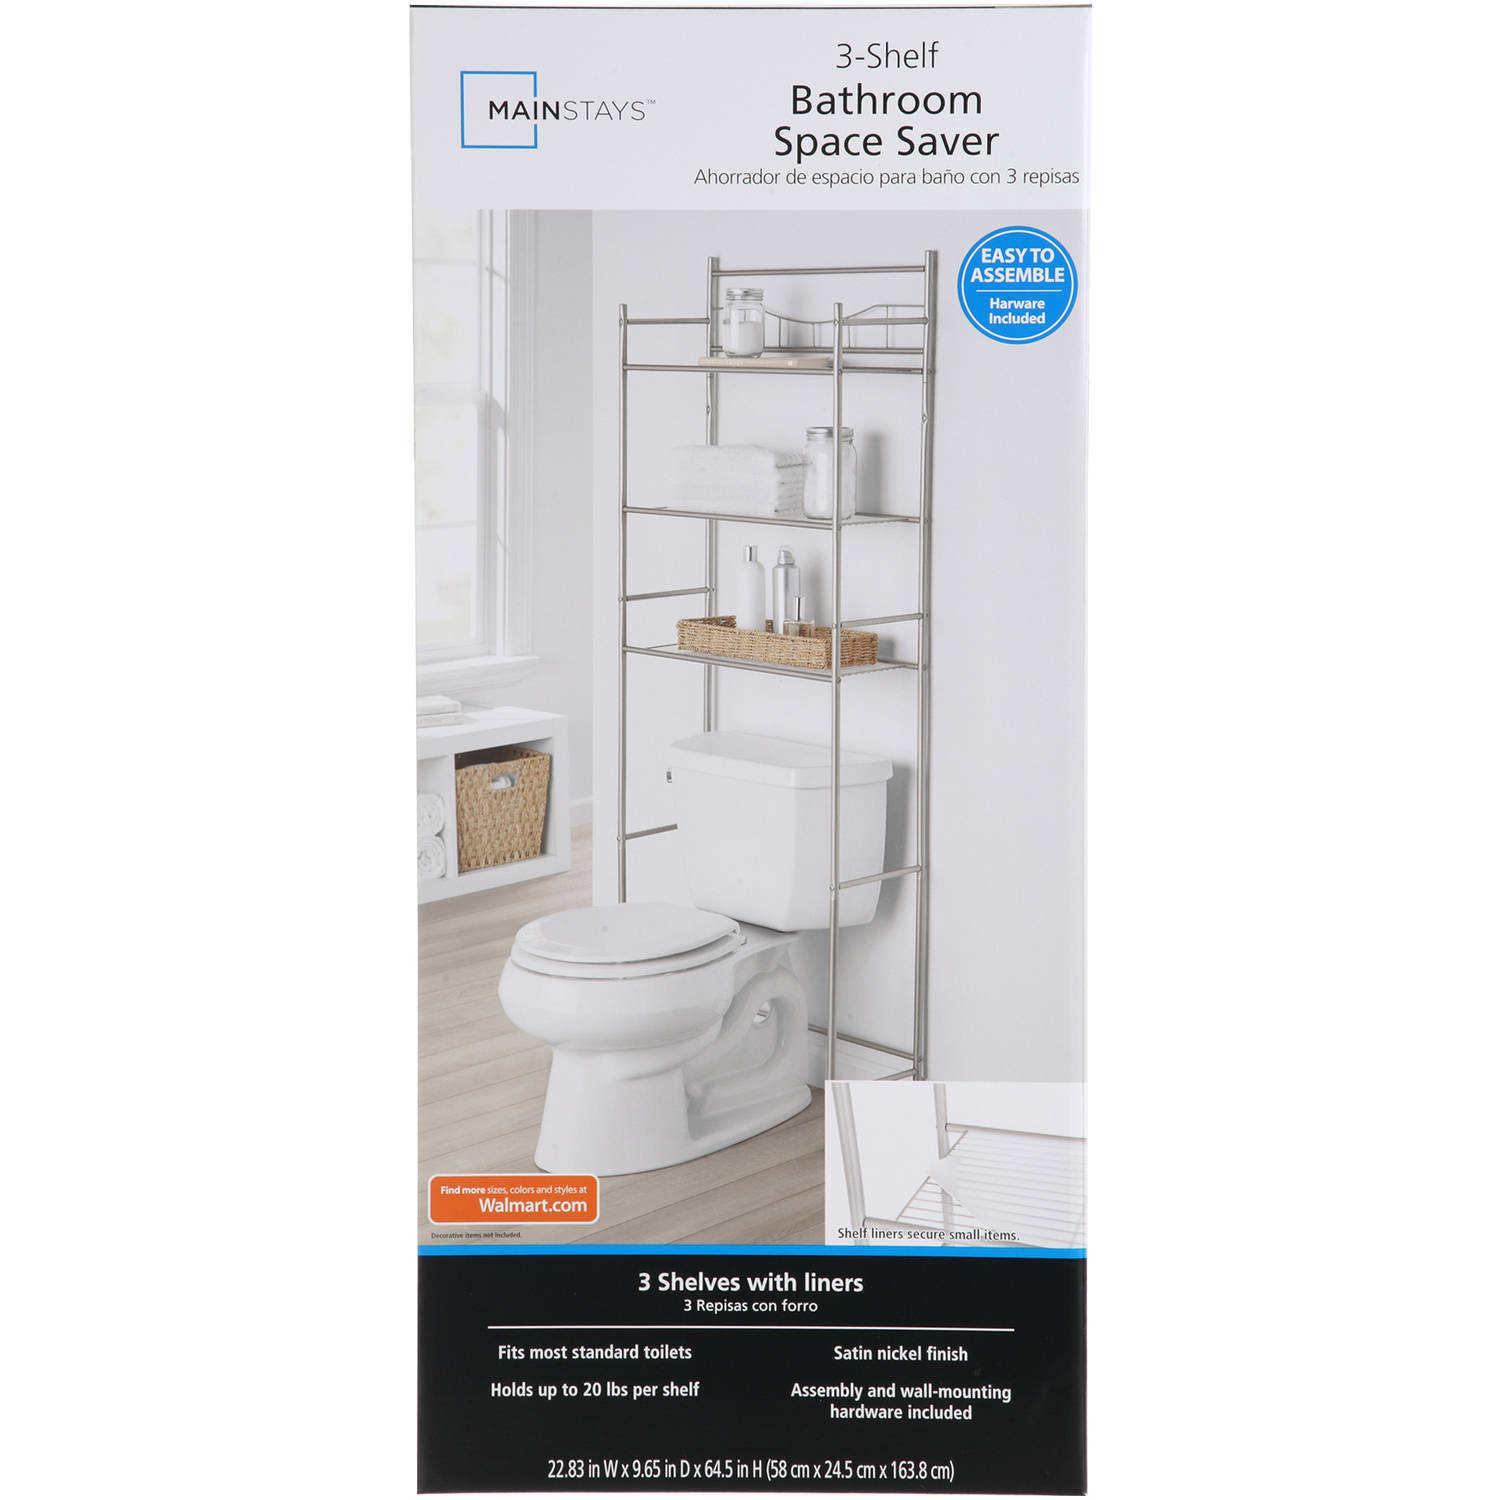 Mainstays 3-Shelf Bathroom over the Toilet Space Saver with Liner, Satin Nickel for Adults - image 8 of 8